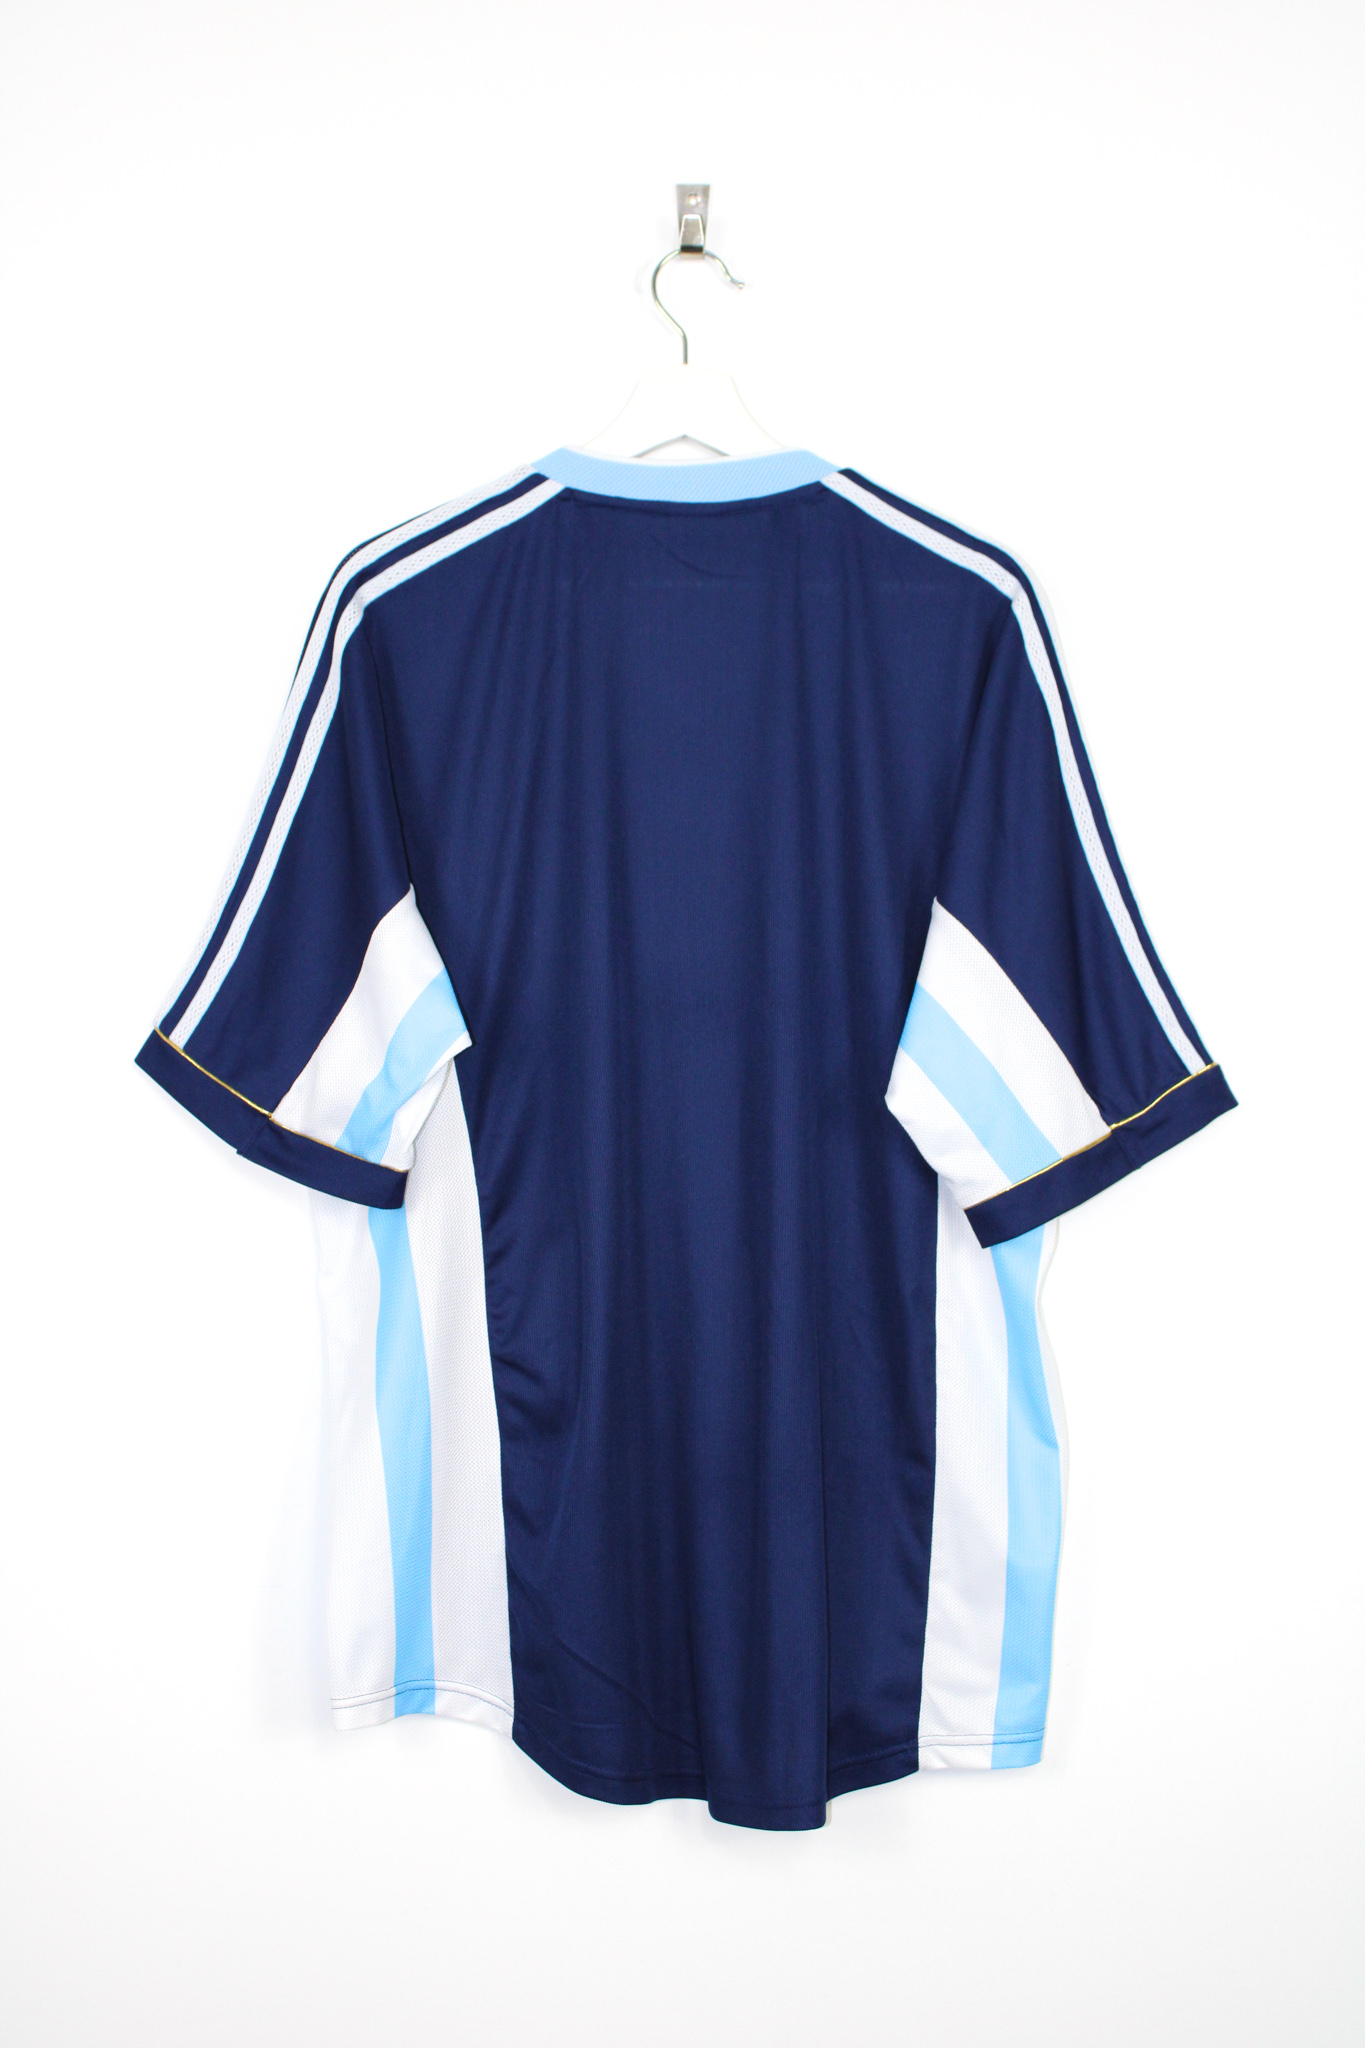 1998 Argentina *PLAYER ISSUE* World Cup away jersey - L • RB - Classic ...